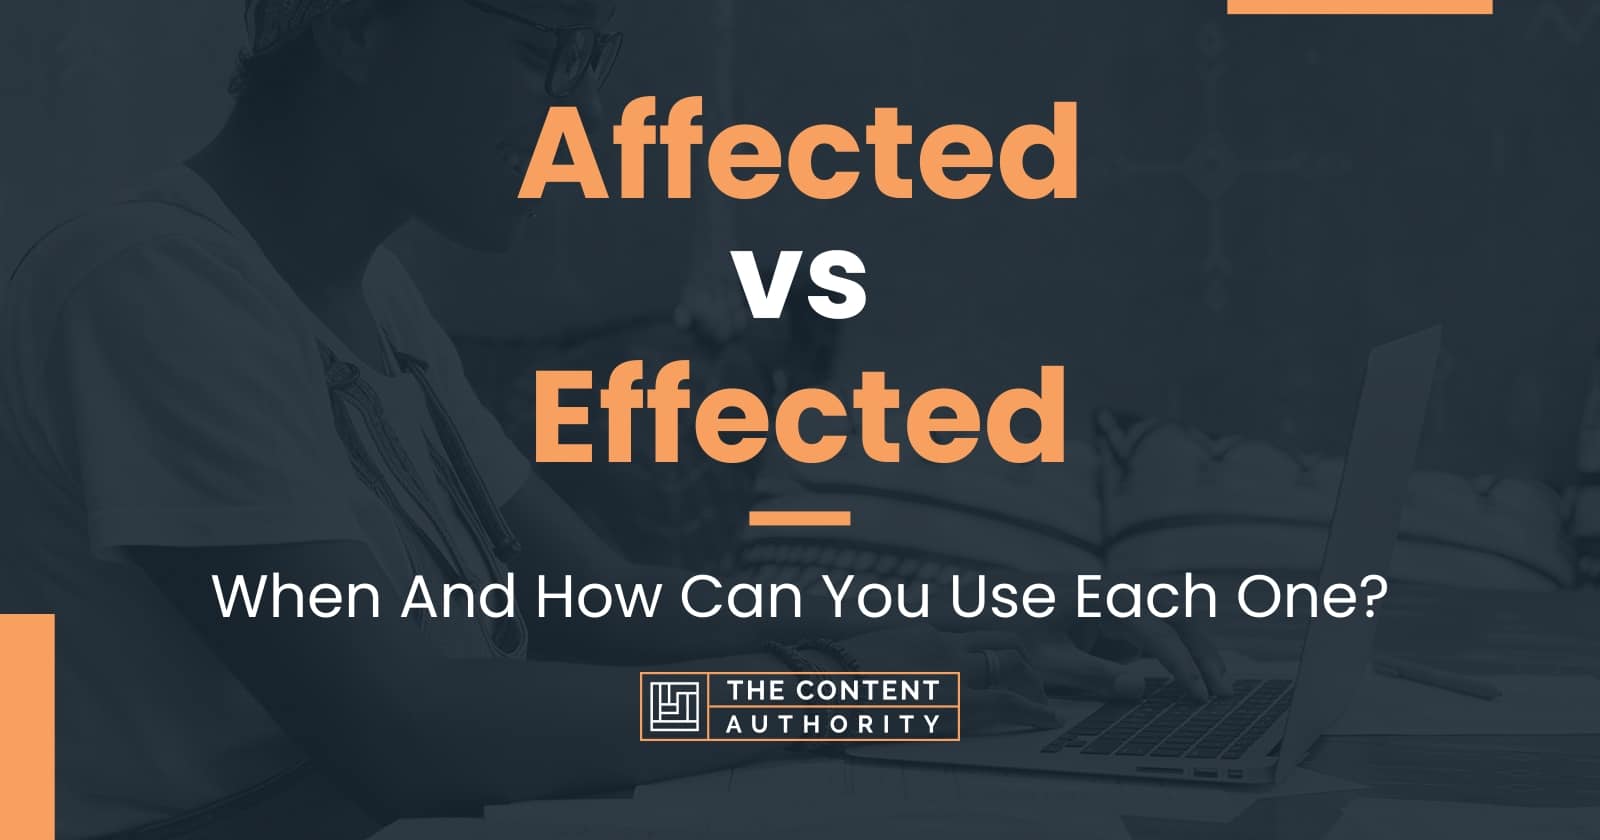 Affected vs Effected: When And How Can You Use Each One?